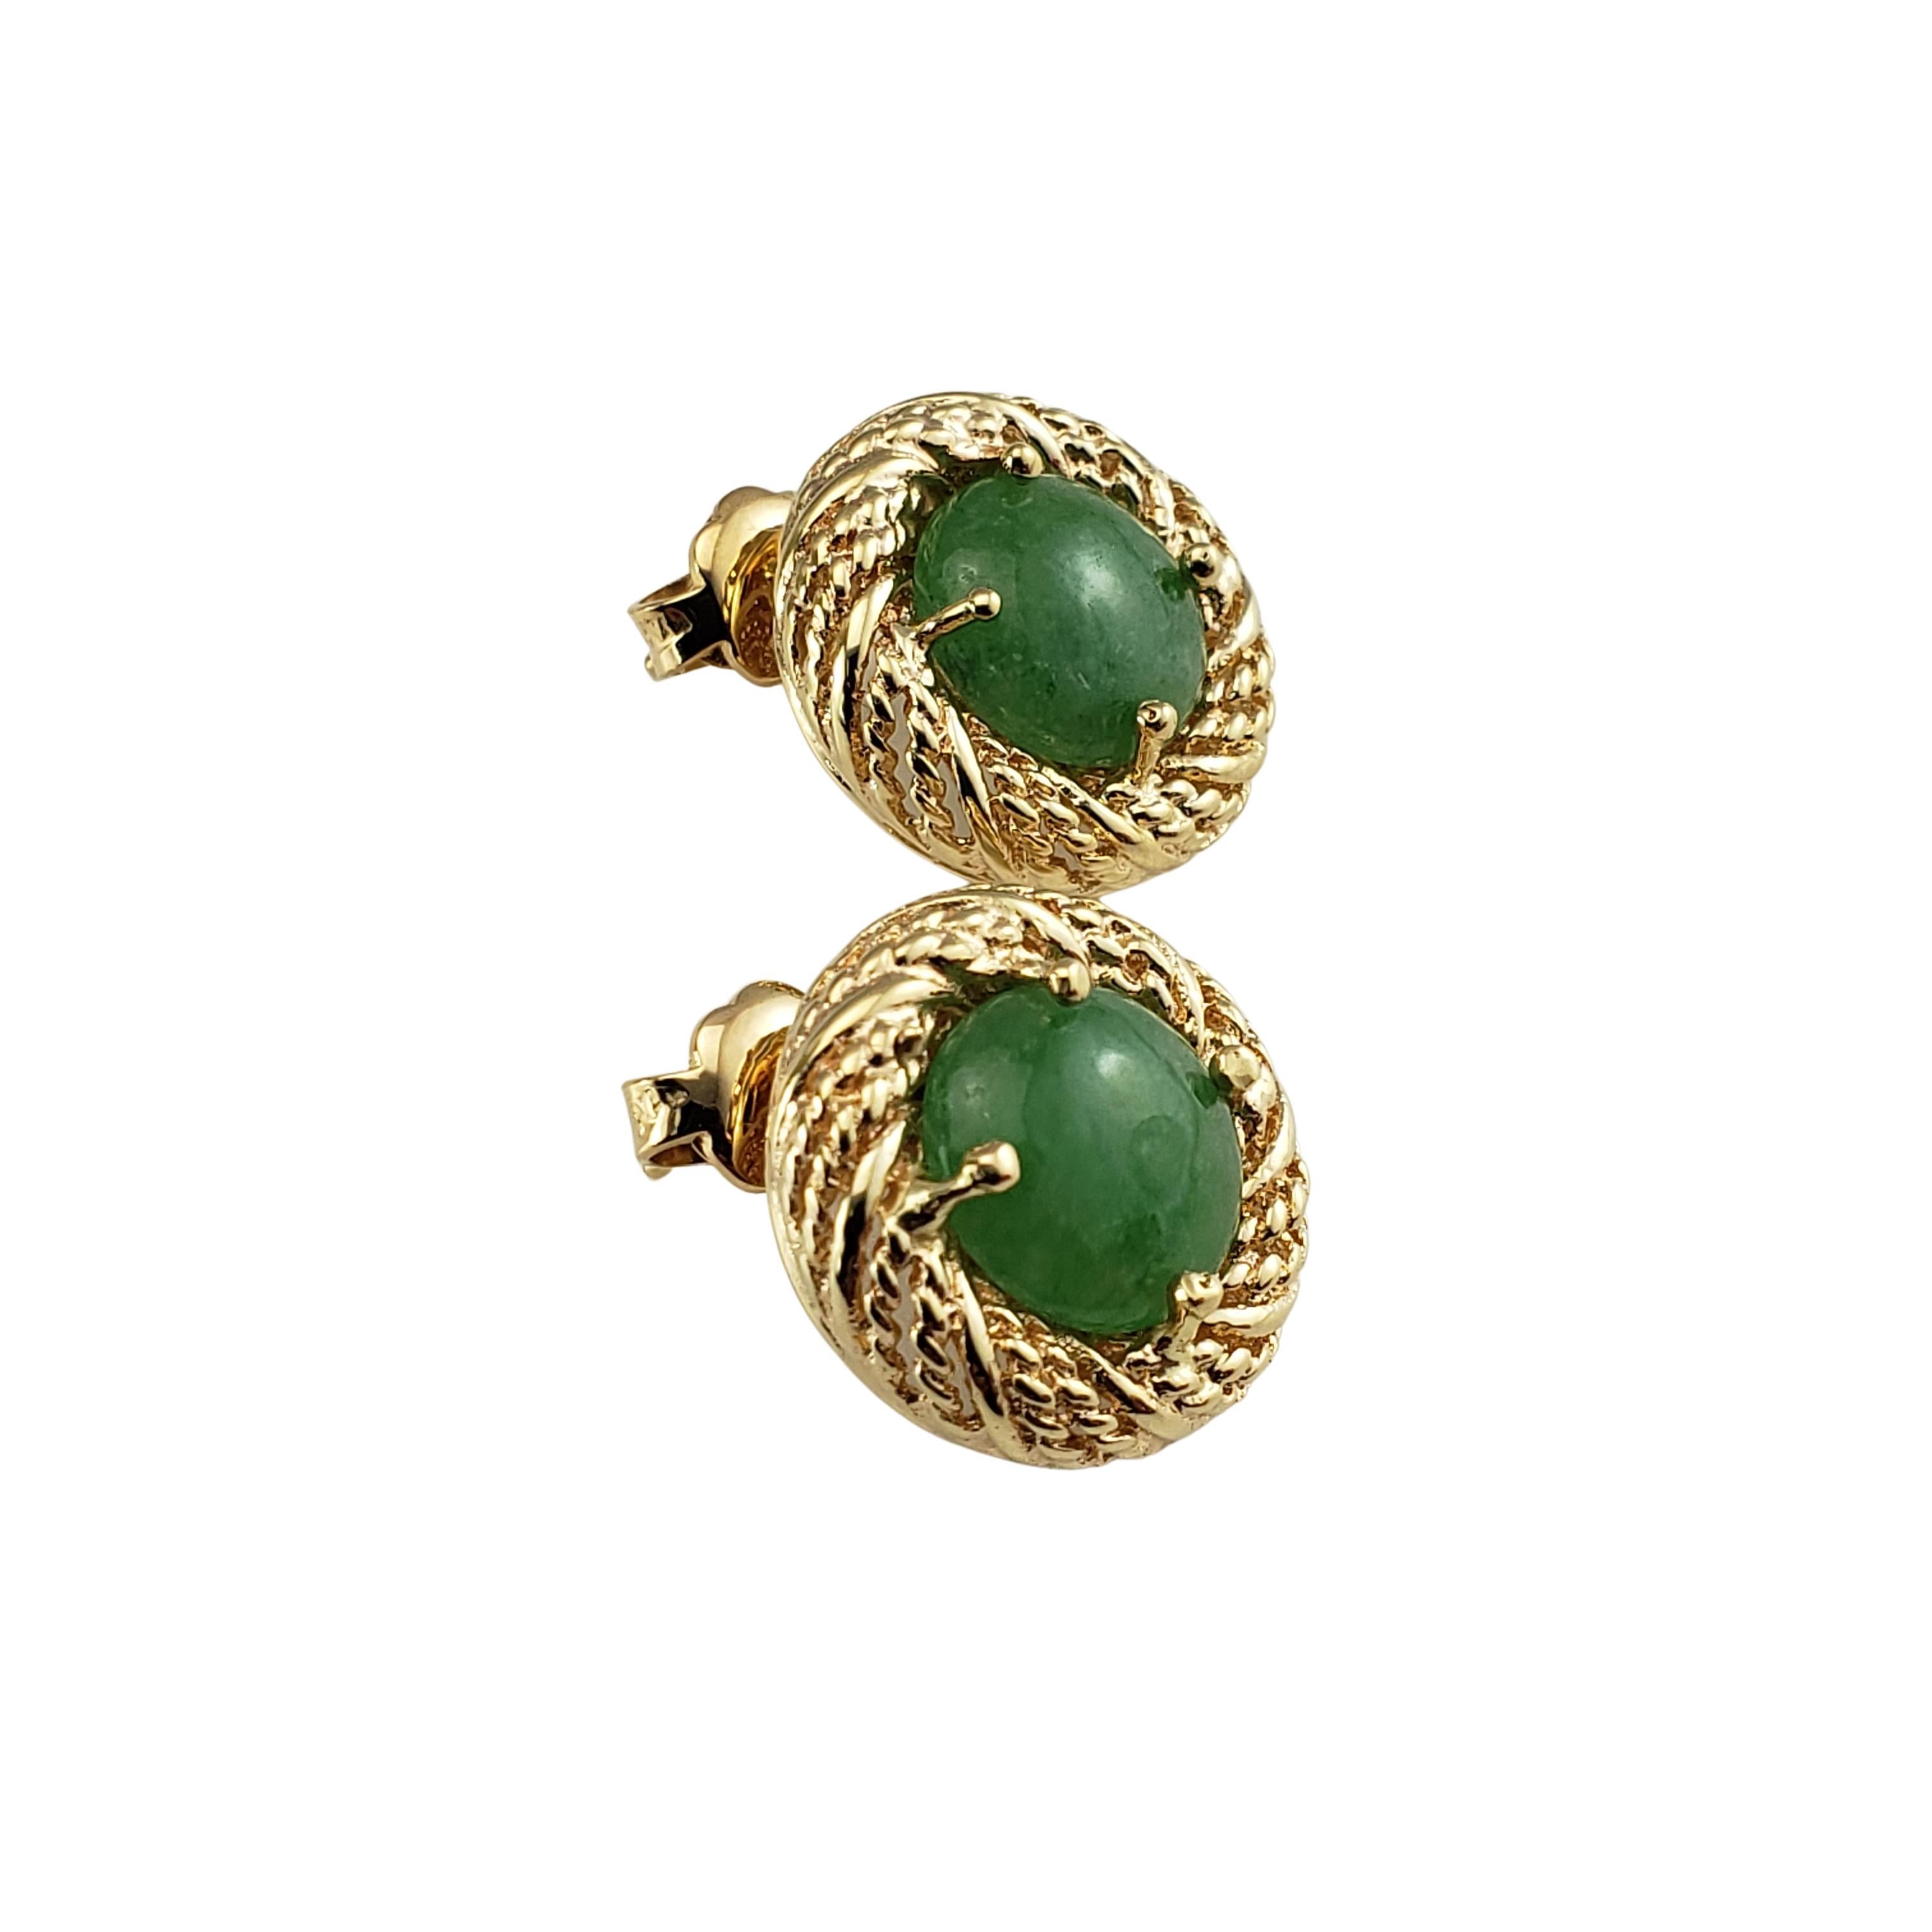 14 Karat Yellow Gold and Jade Earrings-

These lovely earrings each feature one round jade gemstone (9 mm) set in beautifully detailed 14K yellow gold.

Size:  15 mm

Weight:  4.6 dwt. / 7.2 gr.

Tested for 14K gold.

Very good condition,